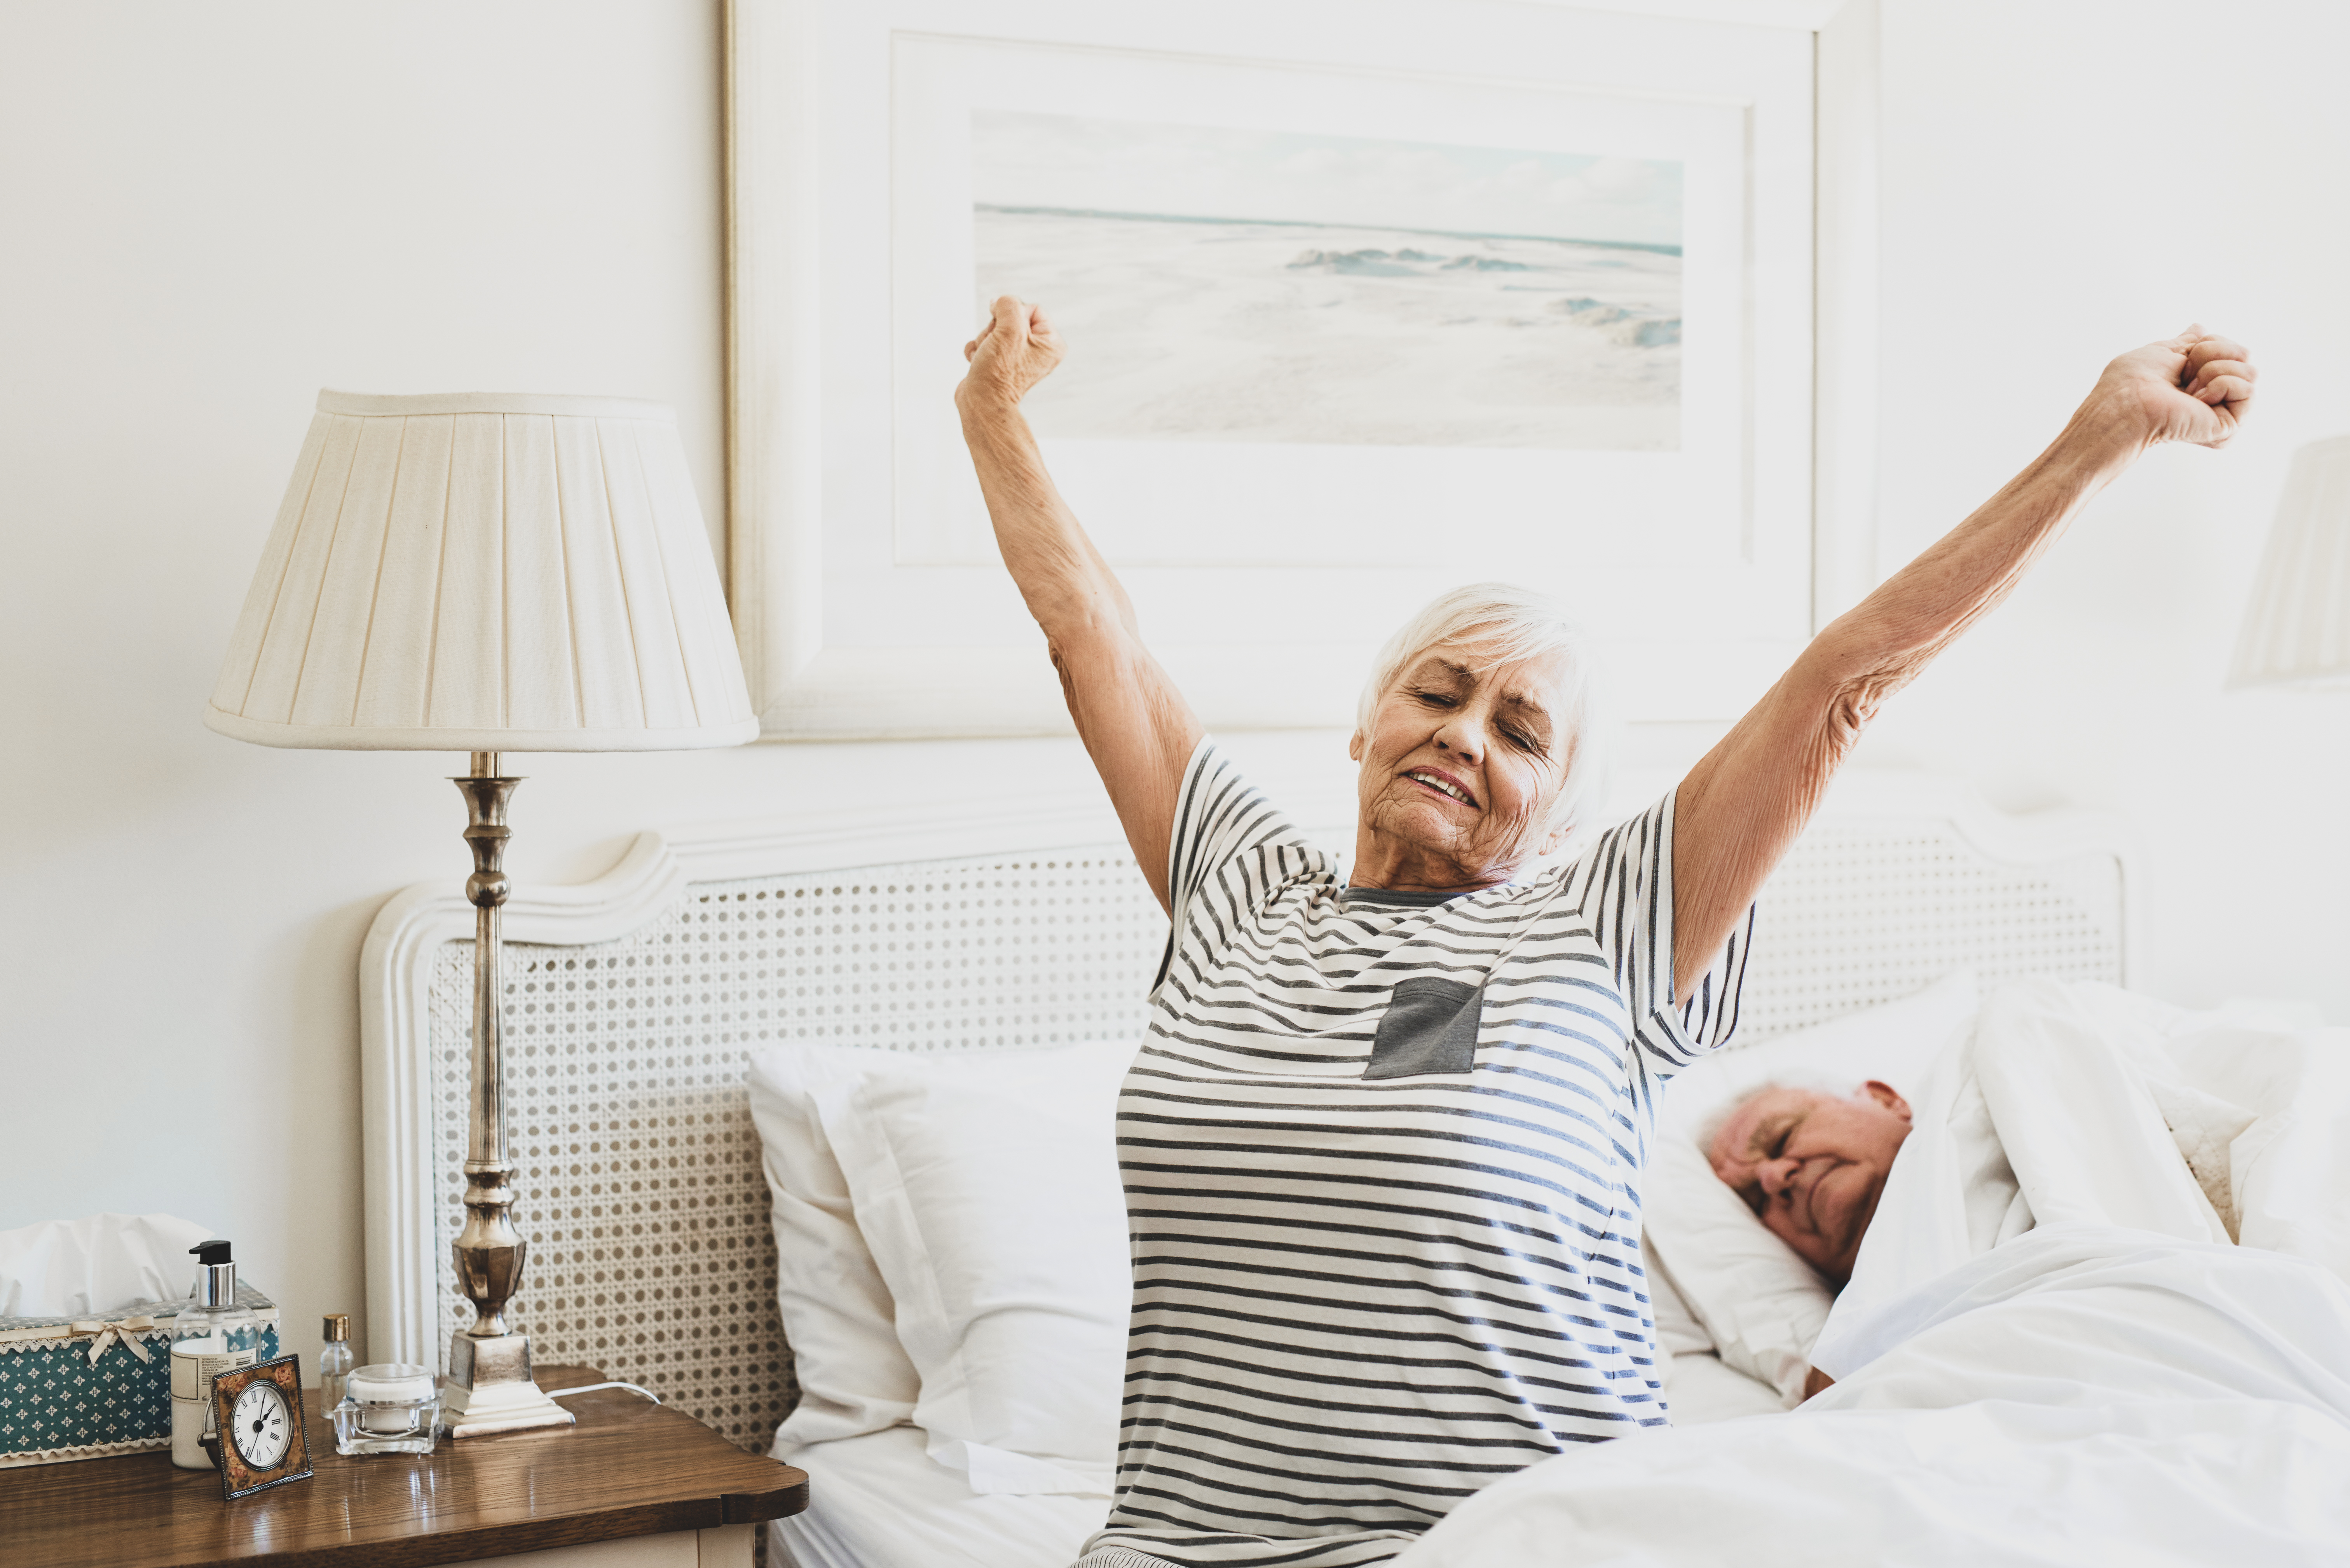 Senior woman sitting on her bed in the morning yawning with arms raised in a stretch with her husband sleeping next to her